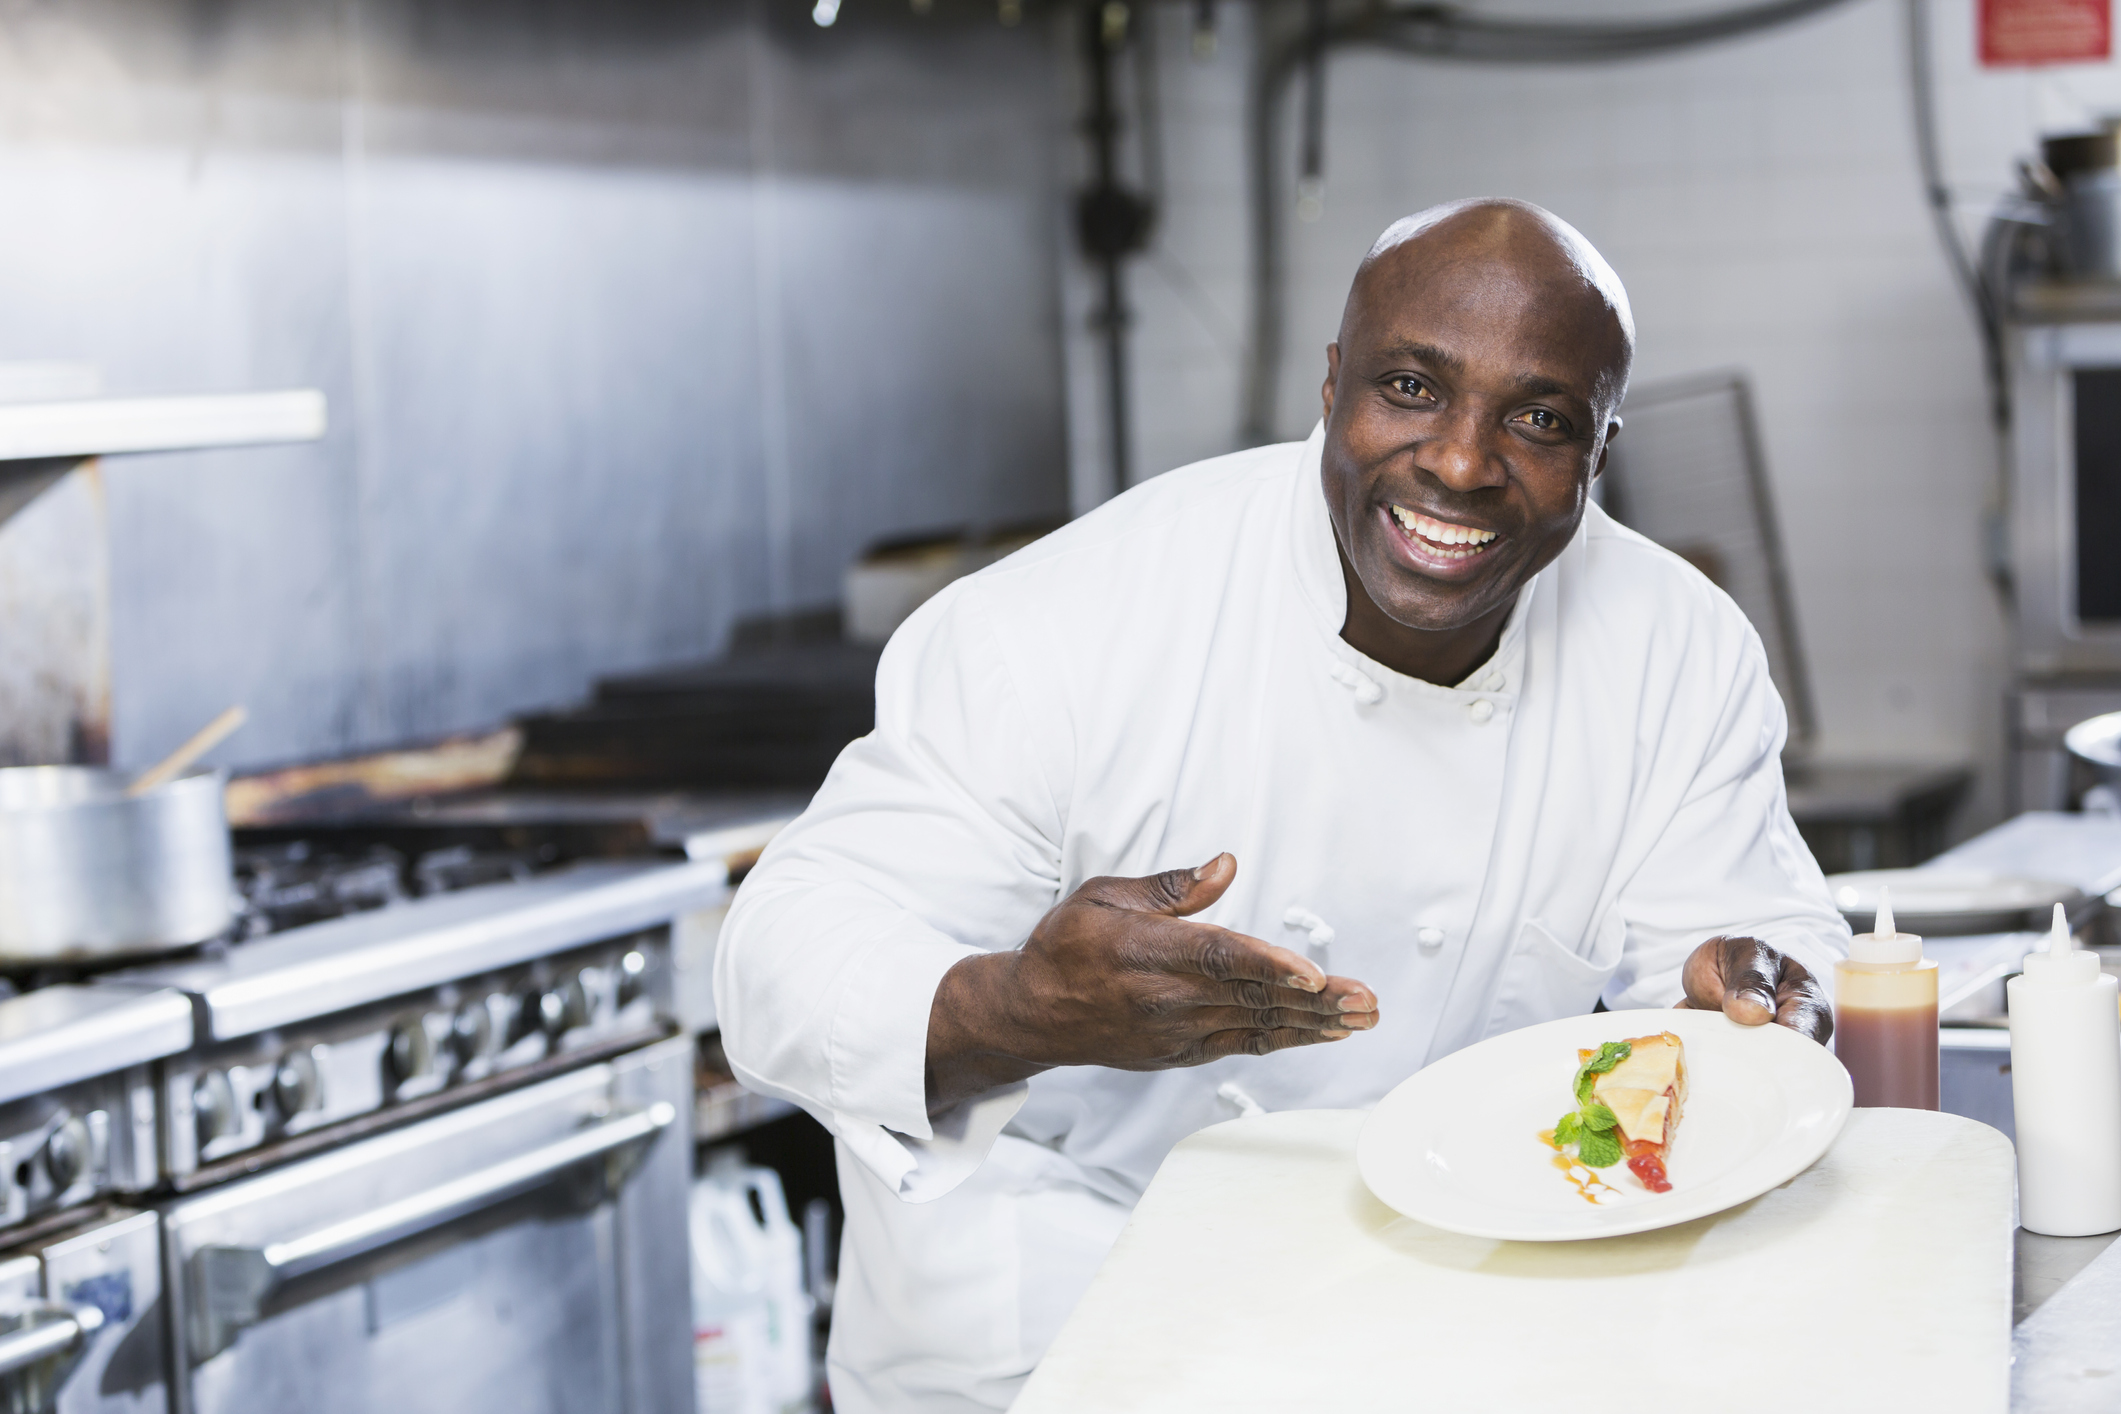 PepsiCo, National Urban League Commit $10M To Support 500 Black-Owned Restaurants In The U.S.